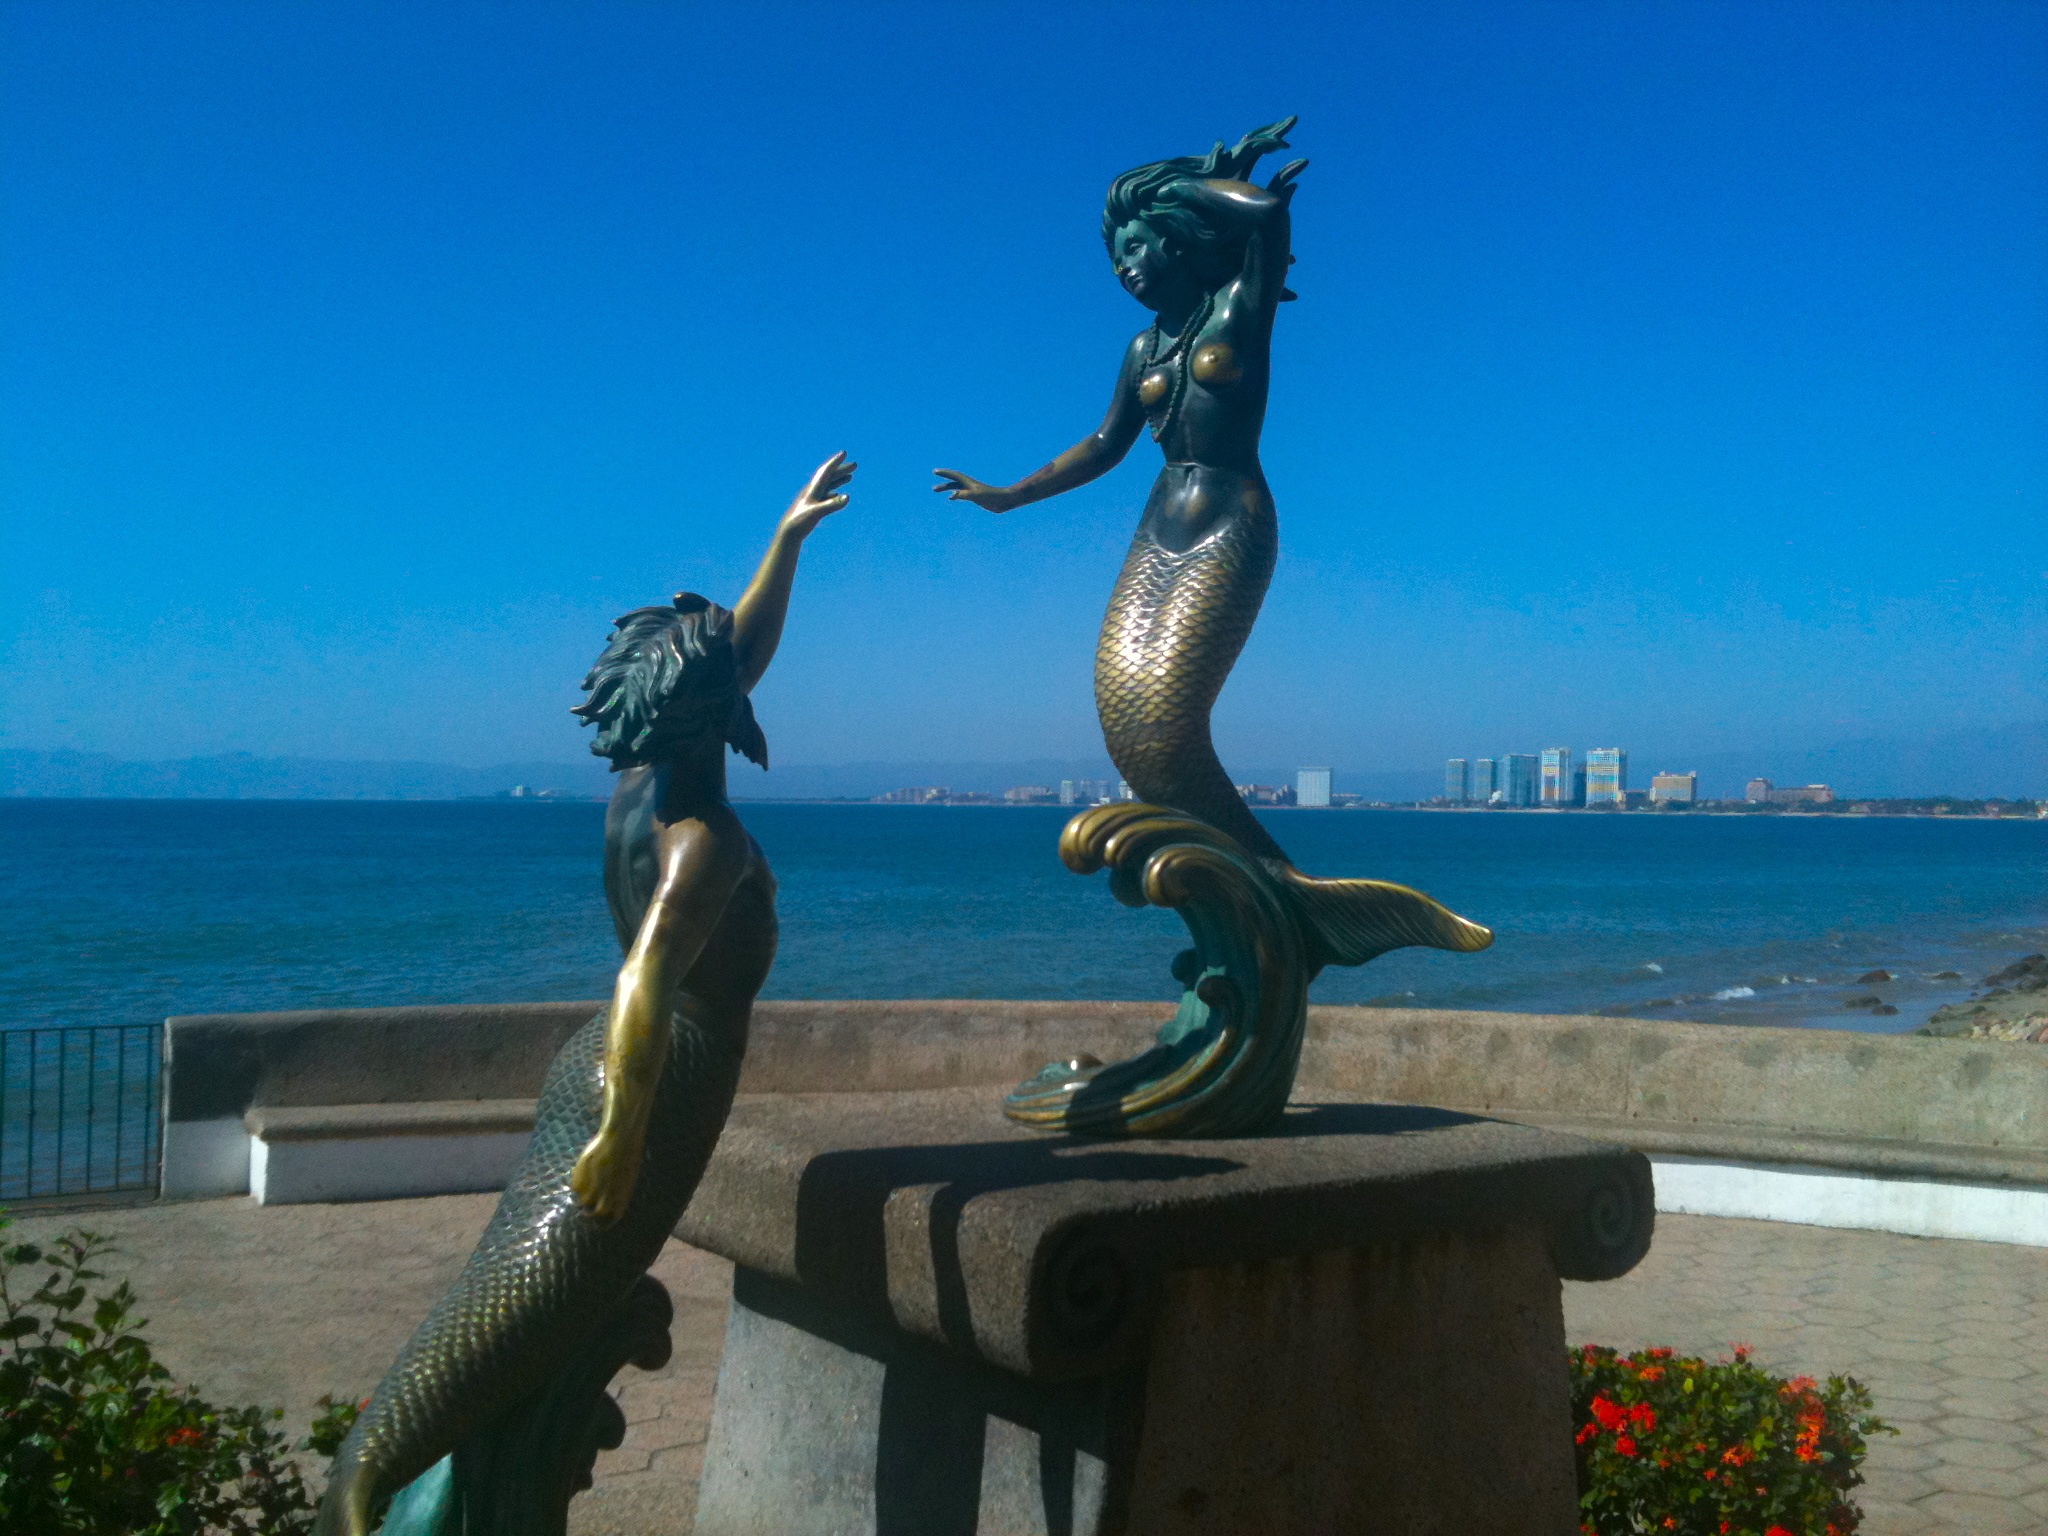 there are some statues of mermaids on the beach